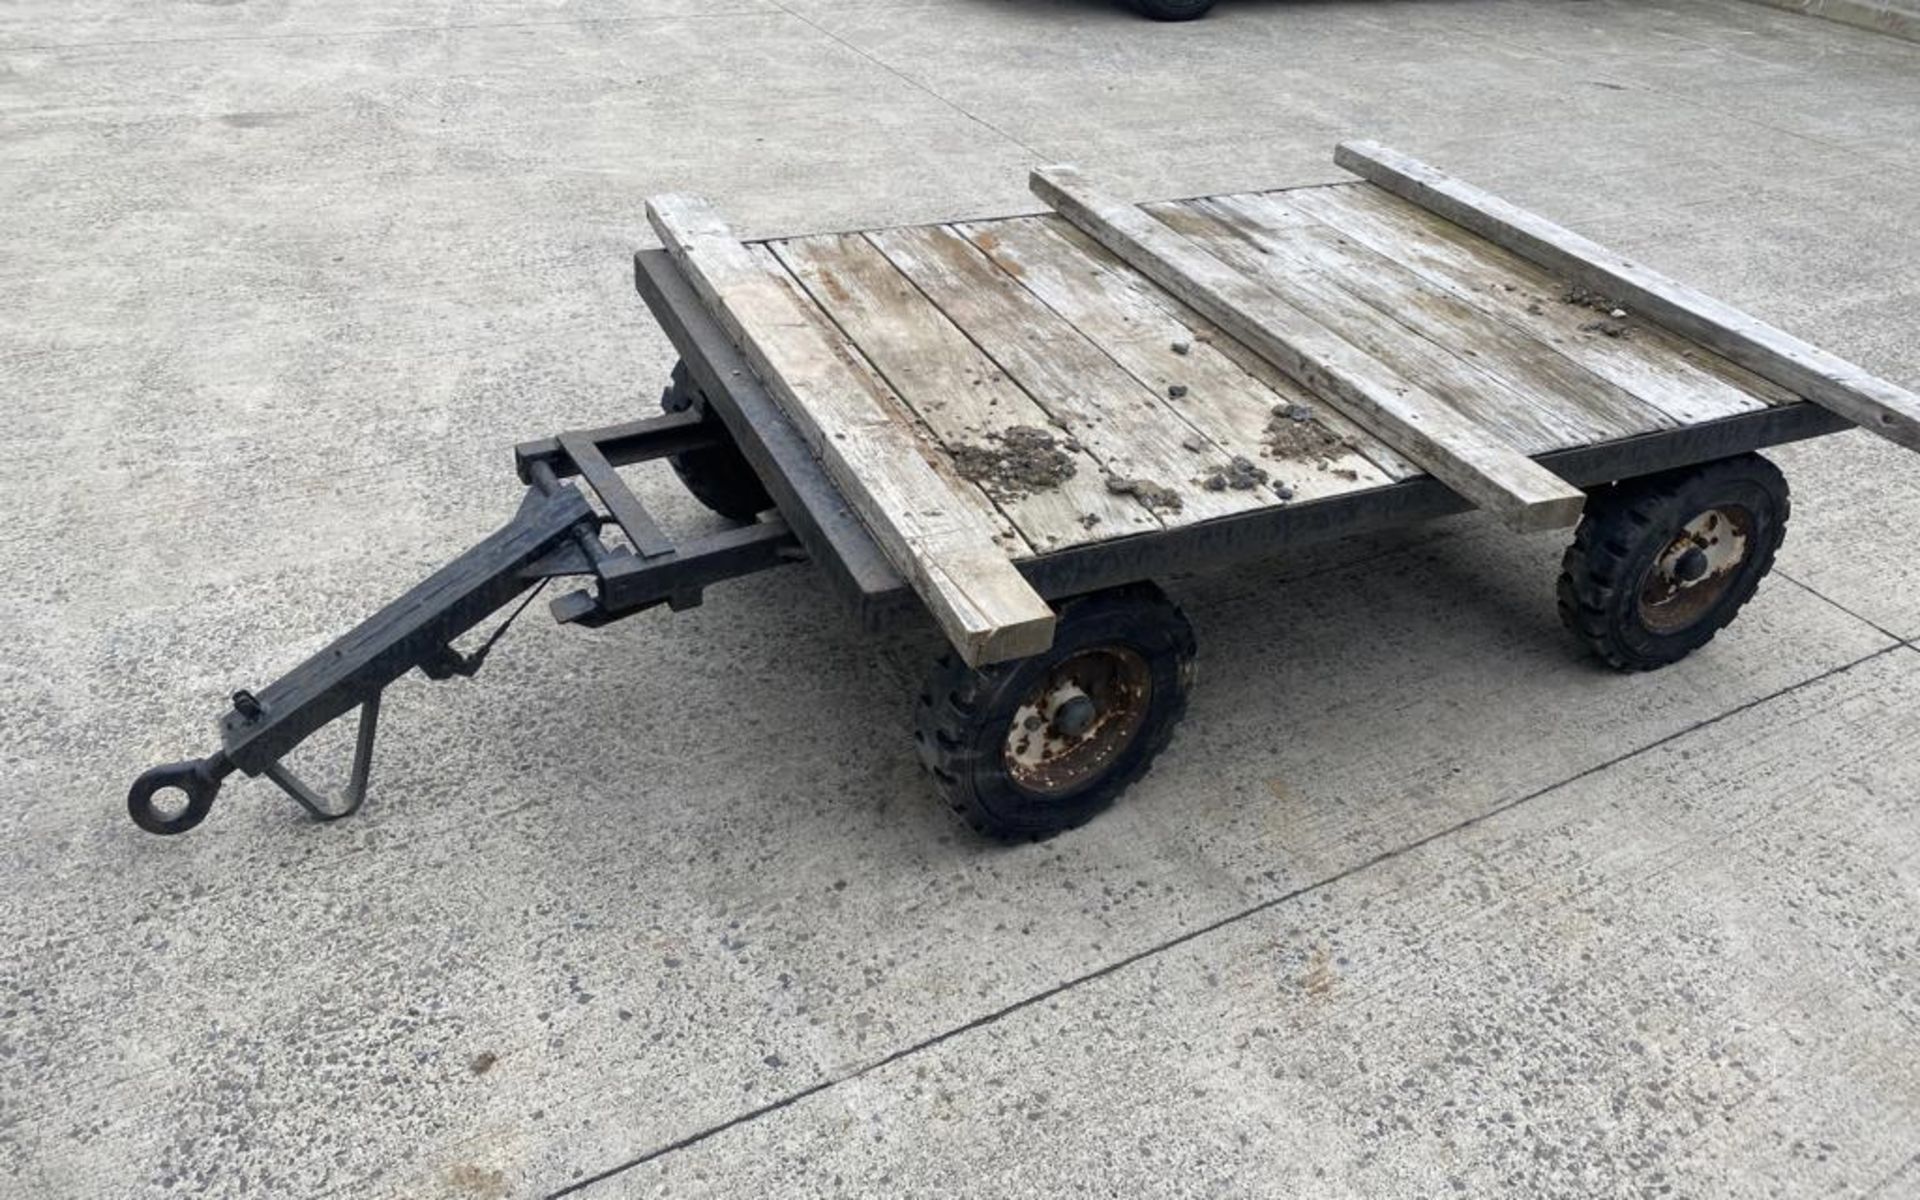 Wooden Cart/ Trailer, loading free of charge - yes, lot located at Ludom Storage, Barleyfield Ind - Image 2 of 2